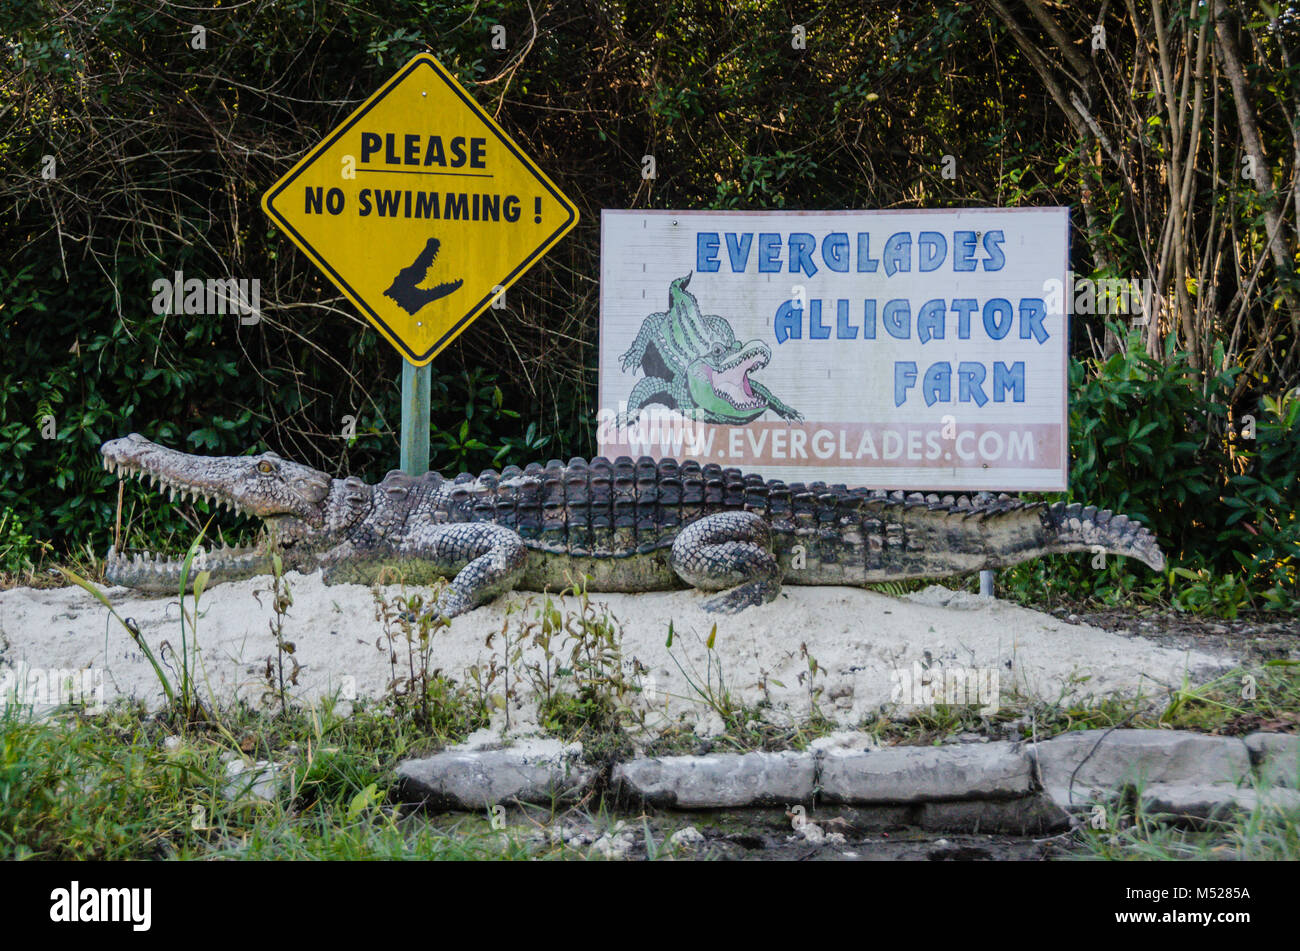 Funny display posing 'No Swimming' sign with alligator statue seen on airboat ride at Everglades Alligator Farm in Southern Florida. Stock Photo